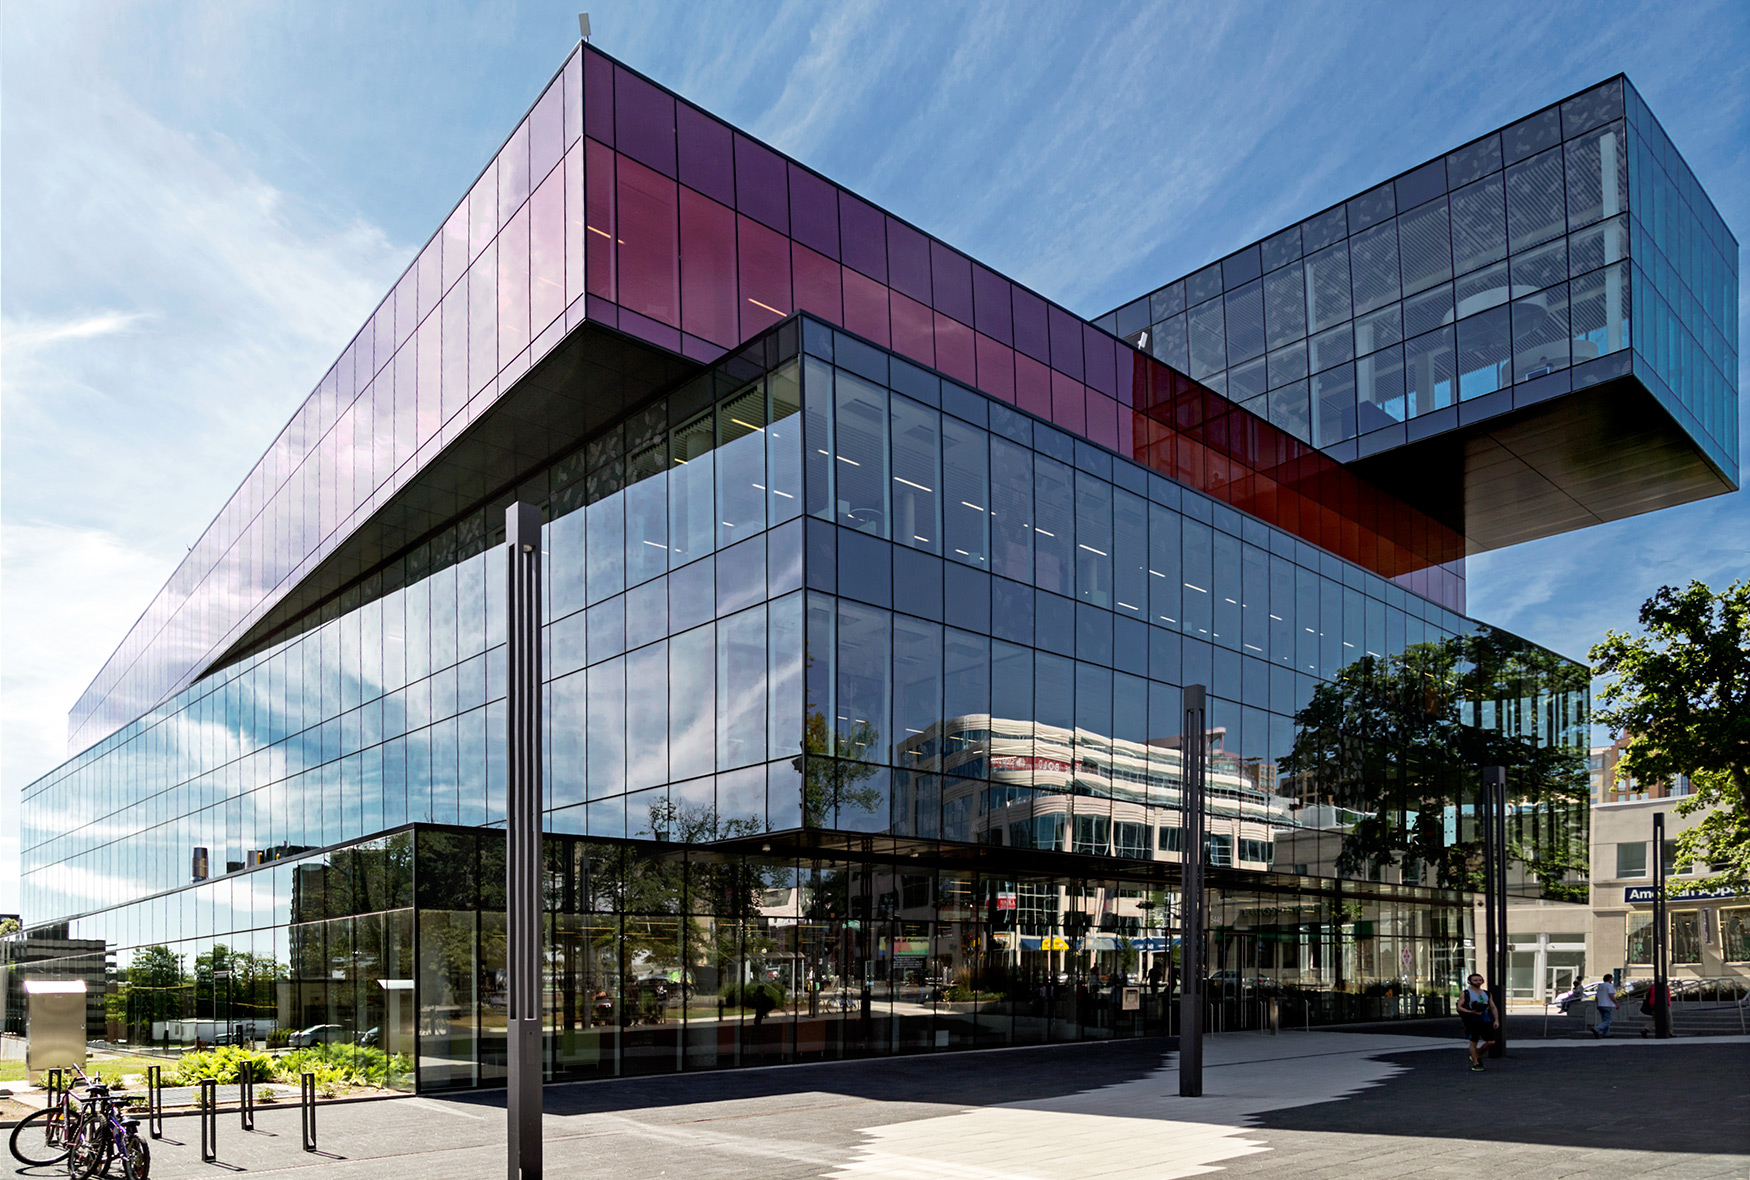 Halifax Central Library, in Halifax, Nova Scotia - designed to look like a stack of books